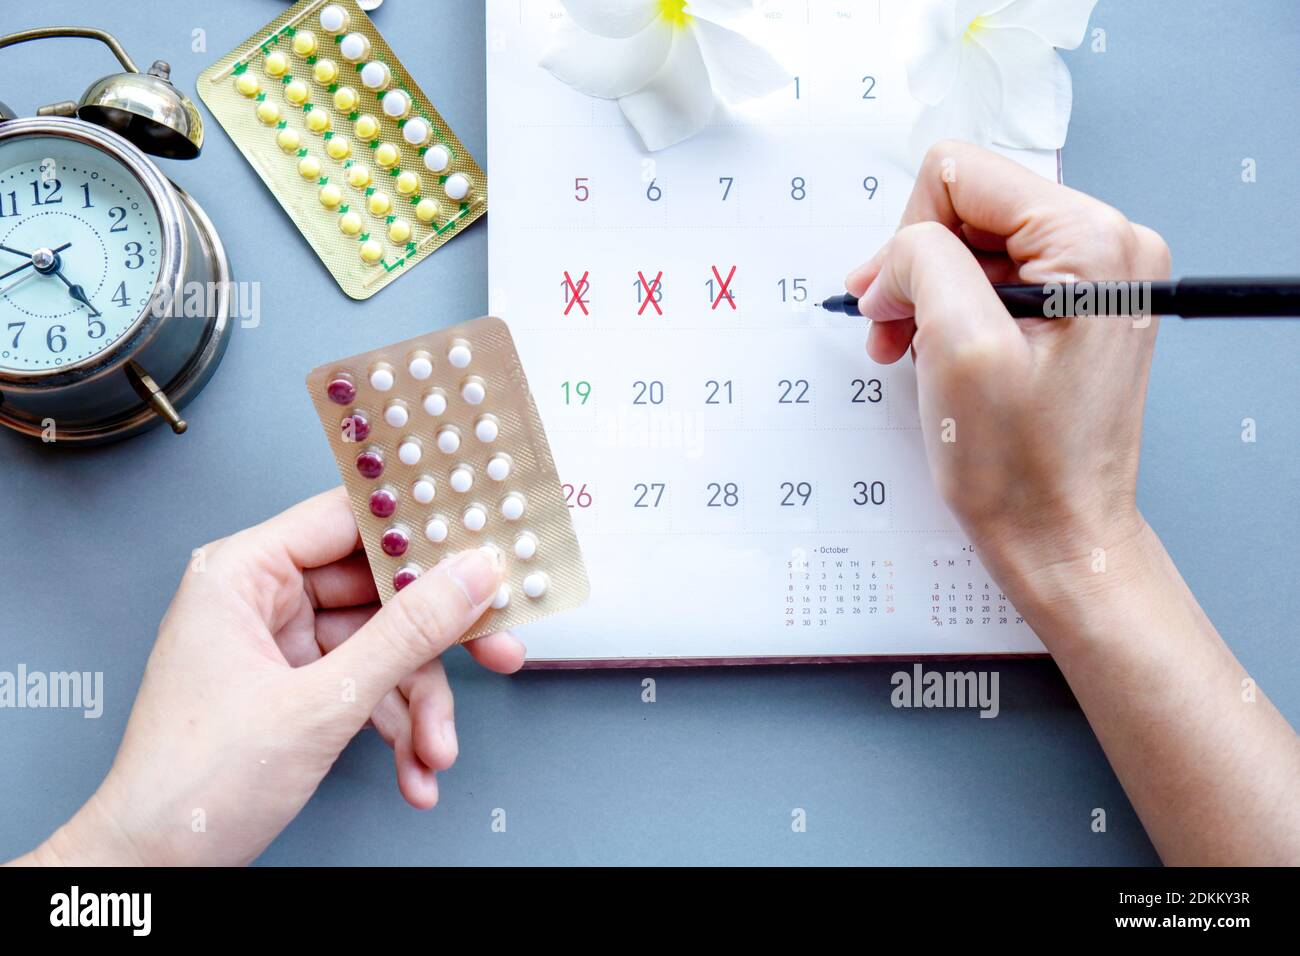 Woman Hand Holding Contraceptive Pills And Mark The Date On Calendar Stock Photo